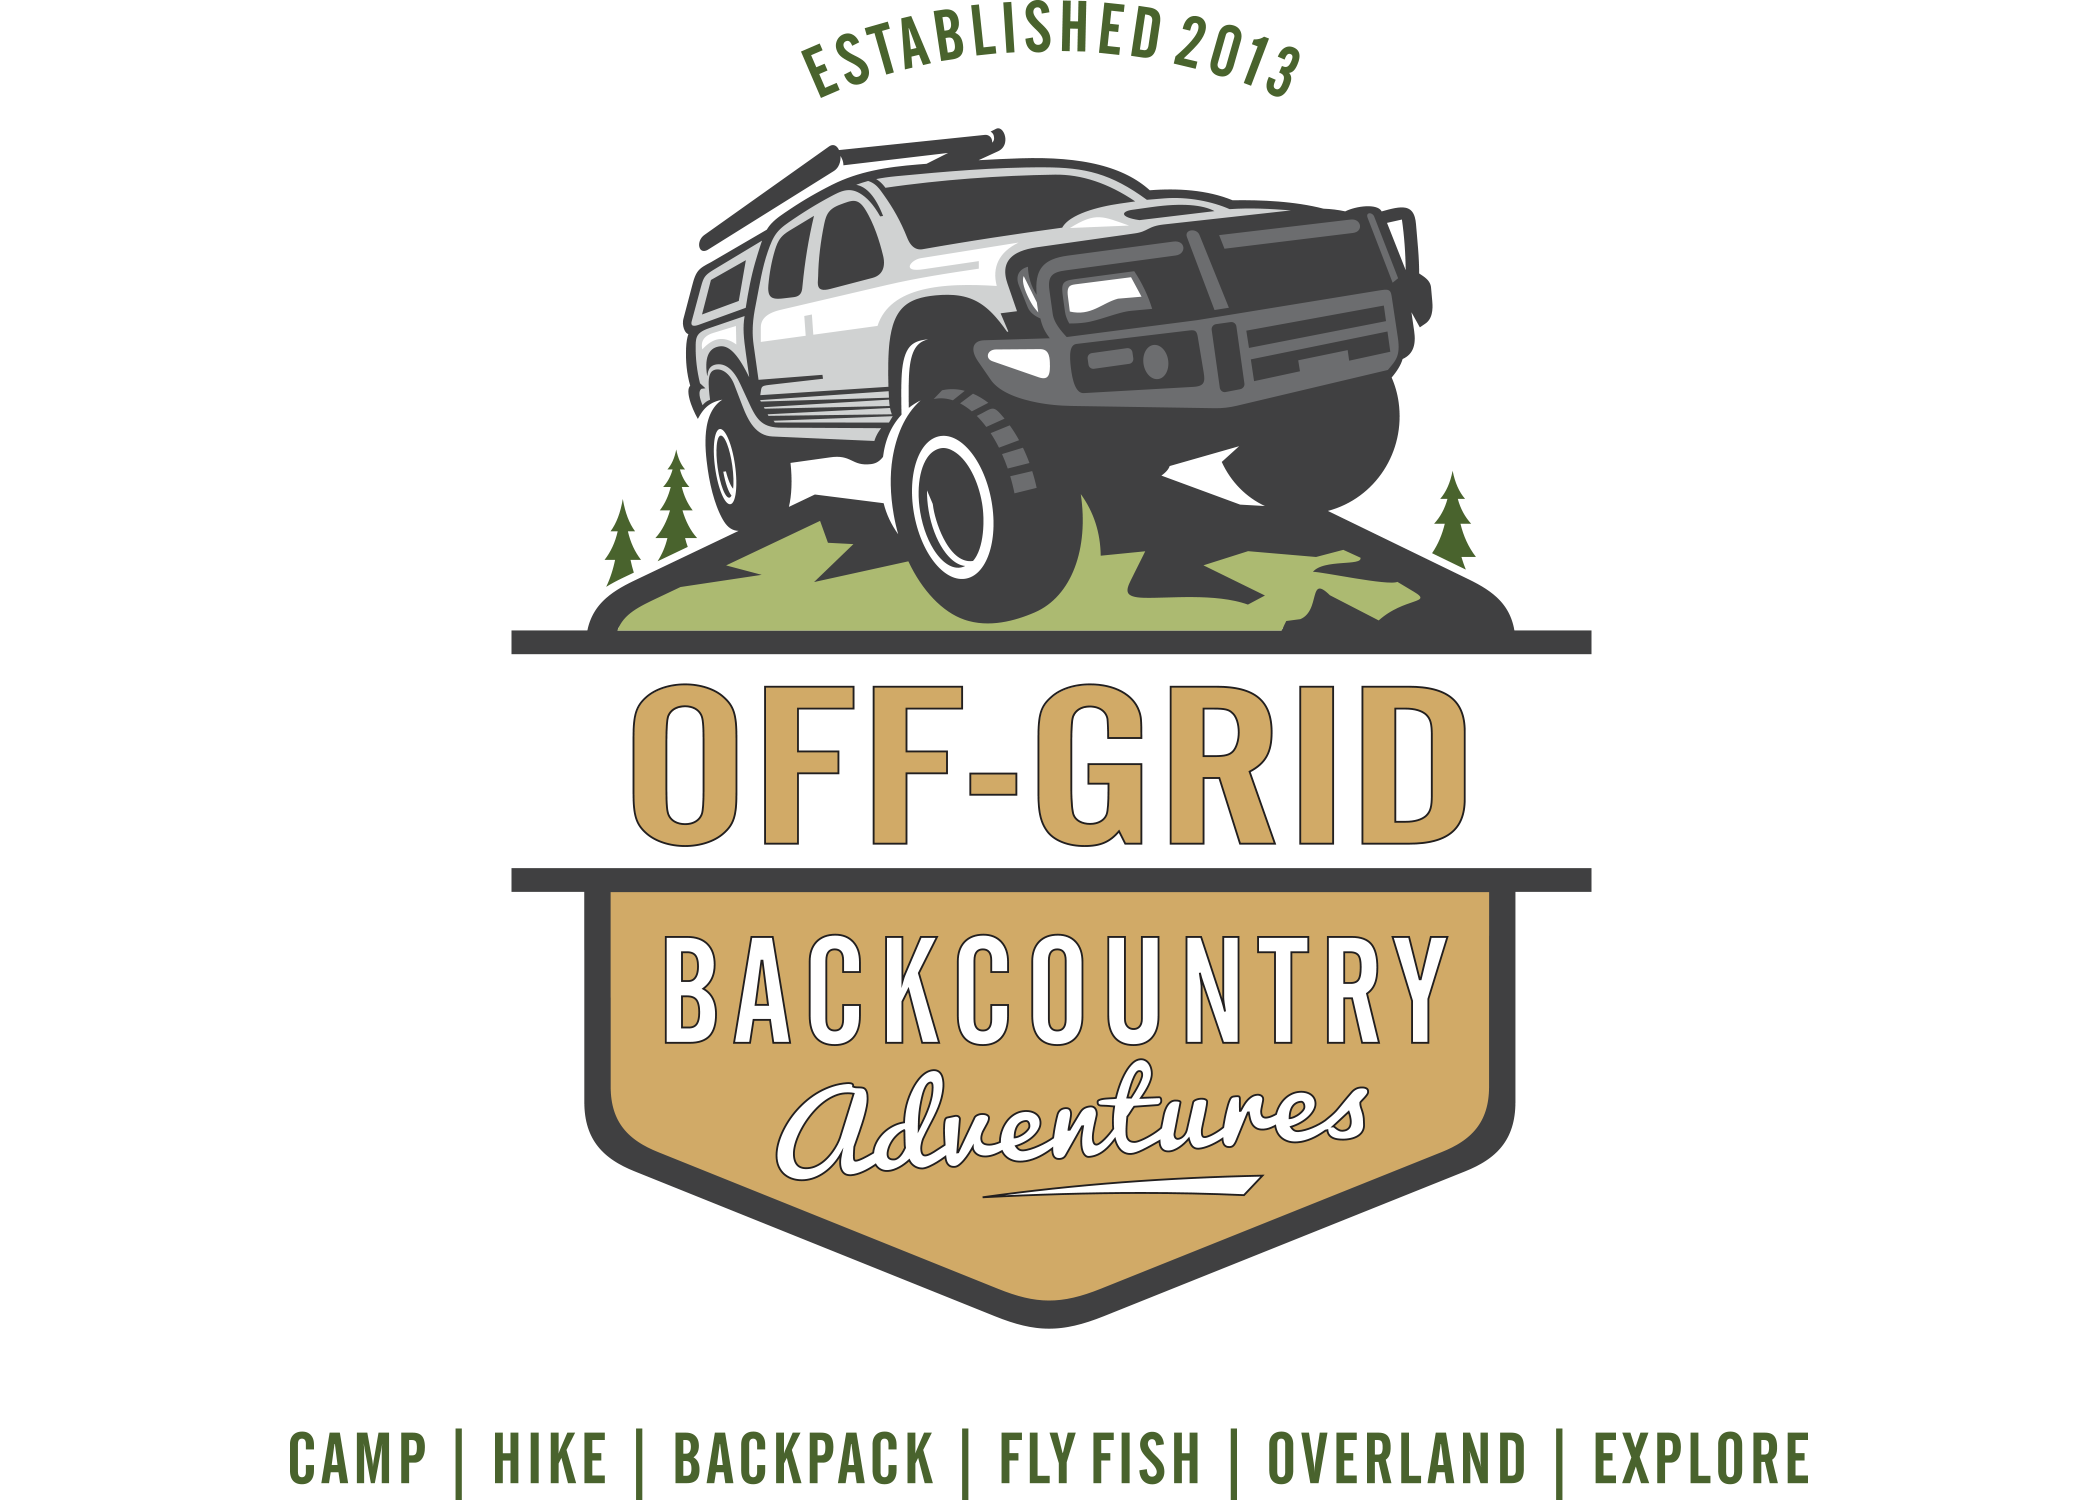 Off-Grid Backcountry Adventures